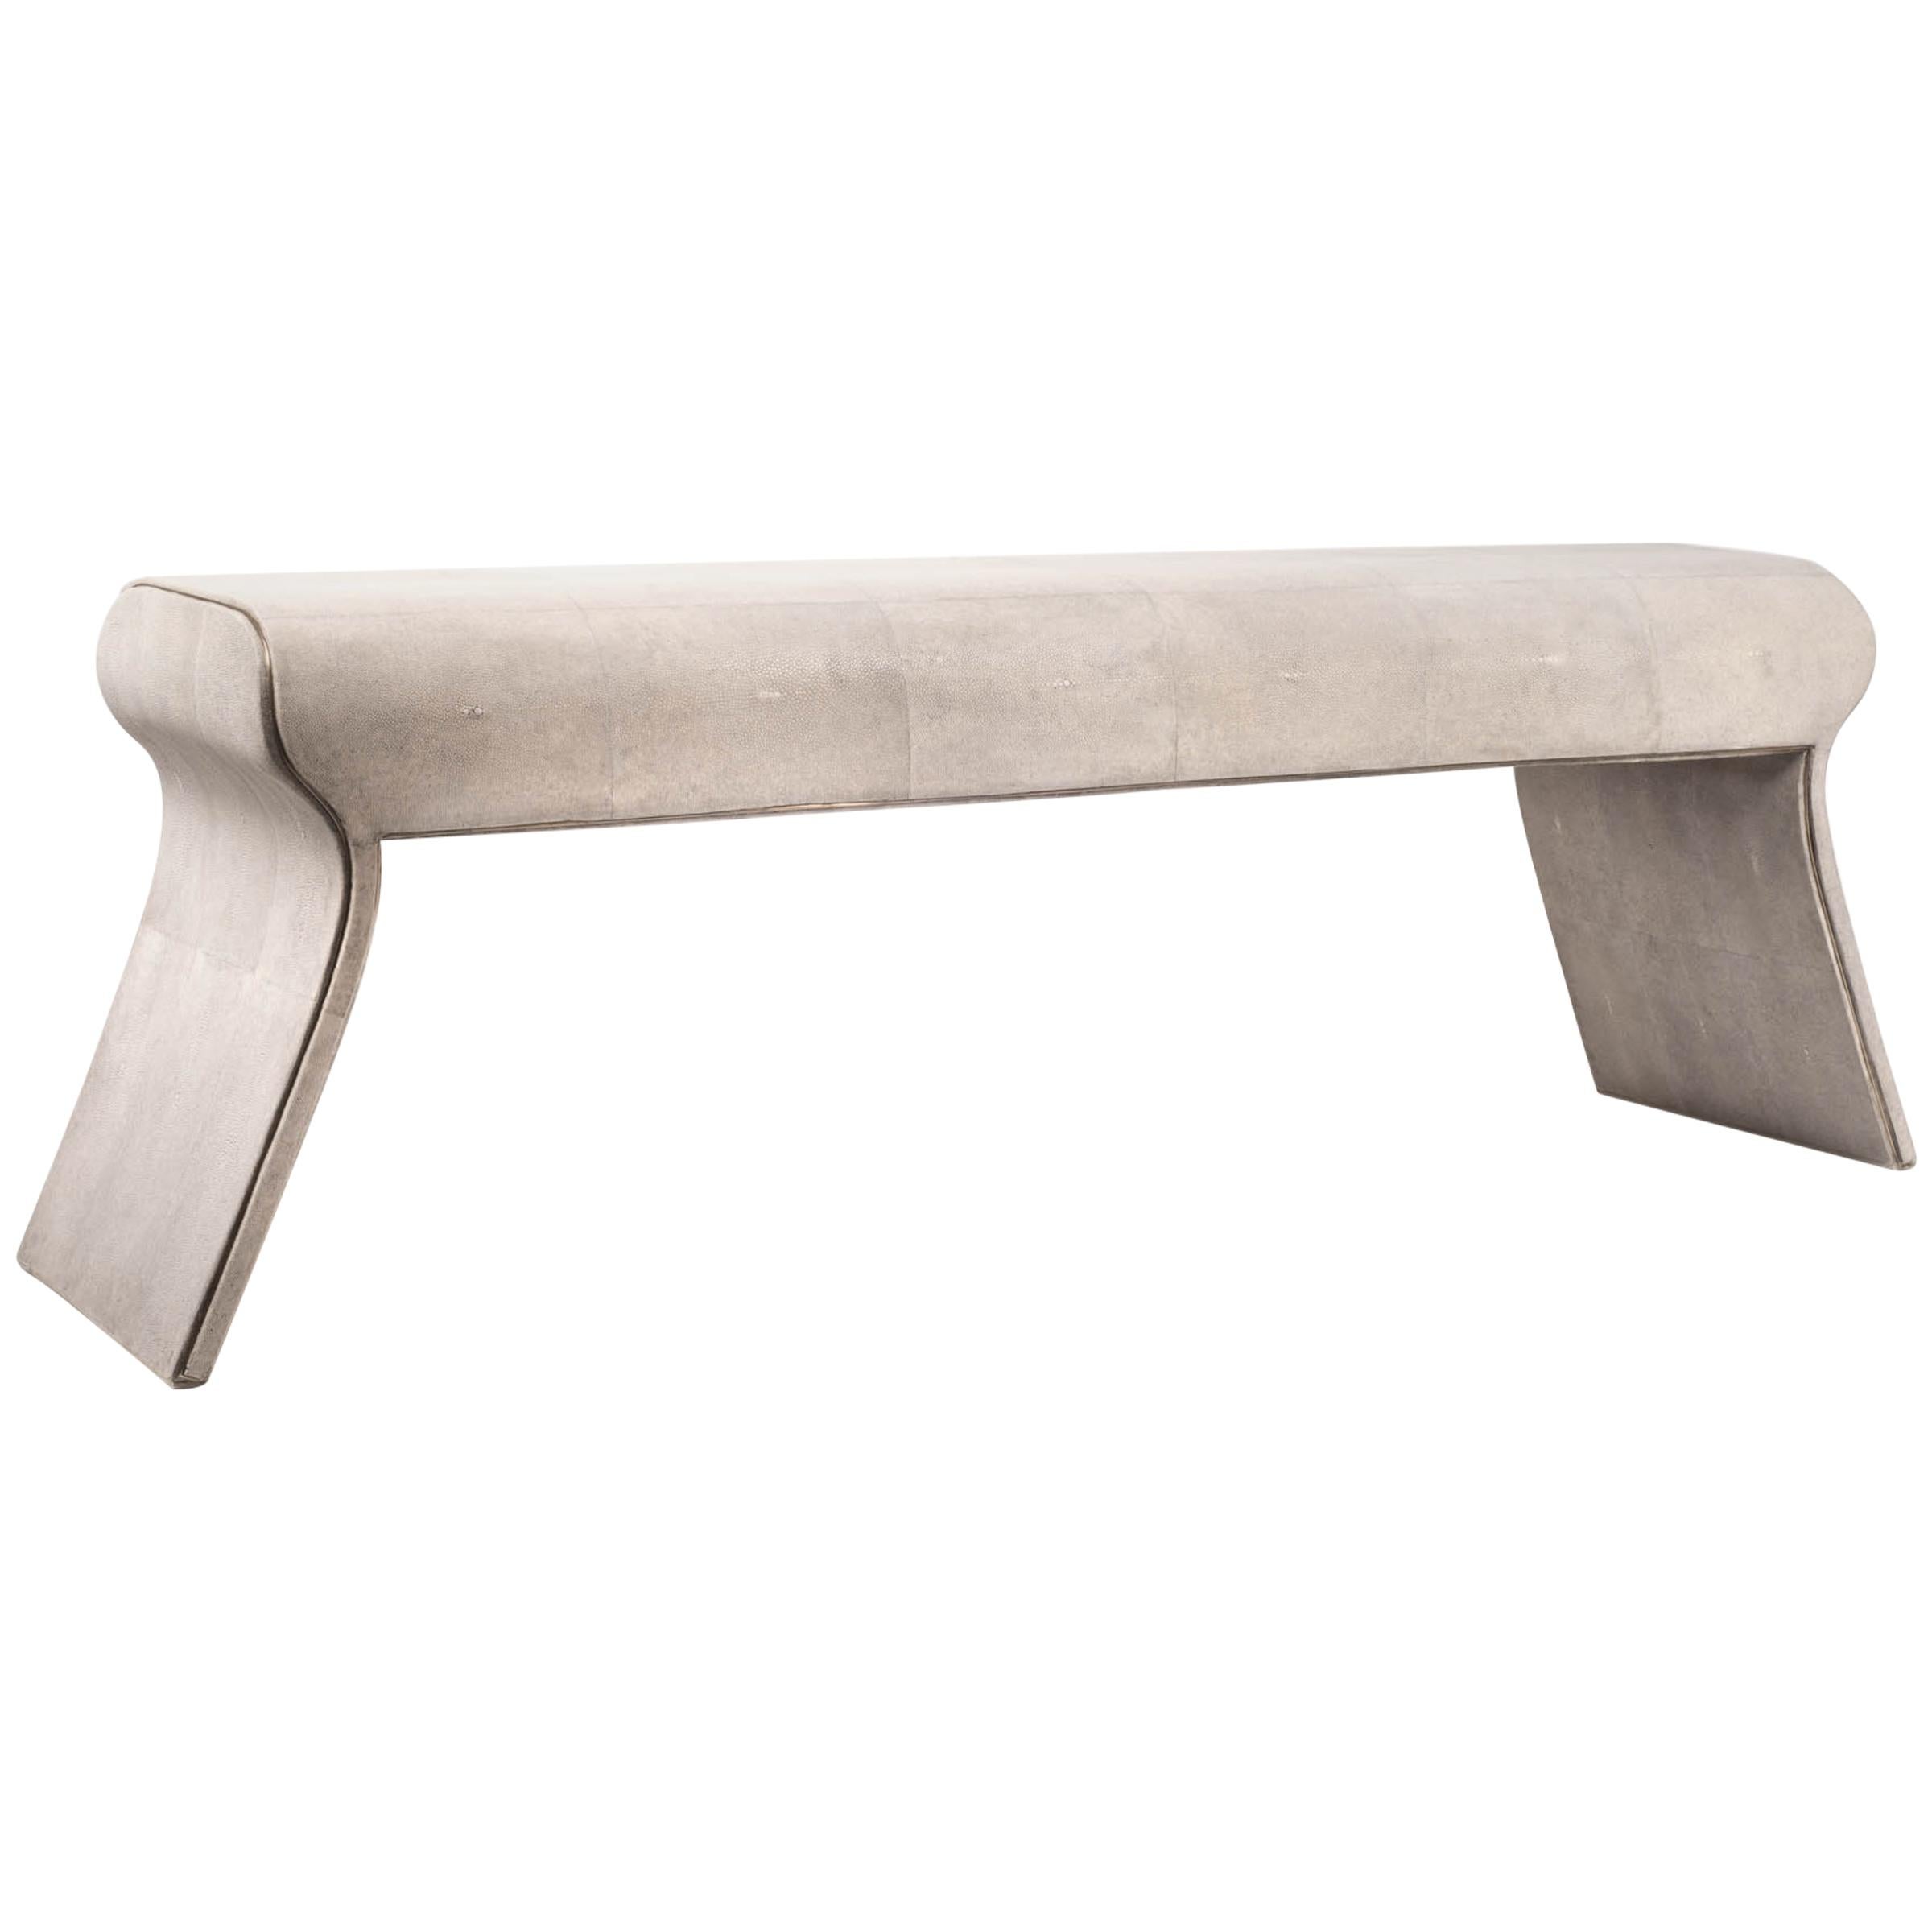 Hand-Crafted Dandy Day Bench in Cream Shagreen and Bronze-Patina Brass by Kifu Paris For Sale